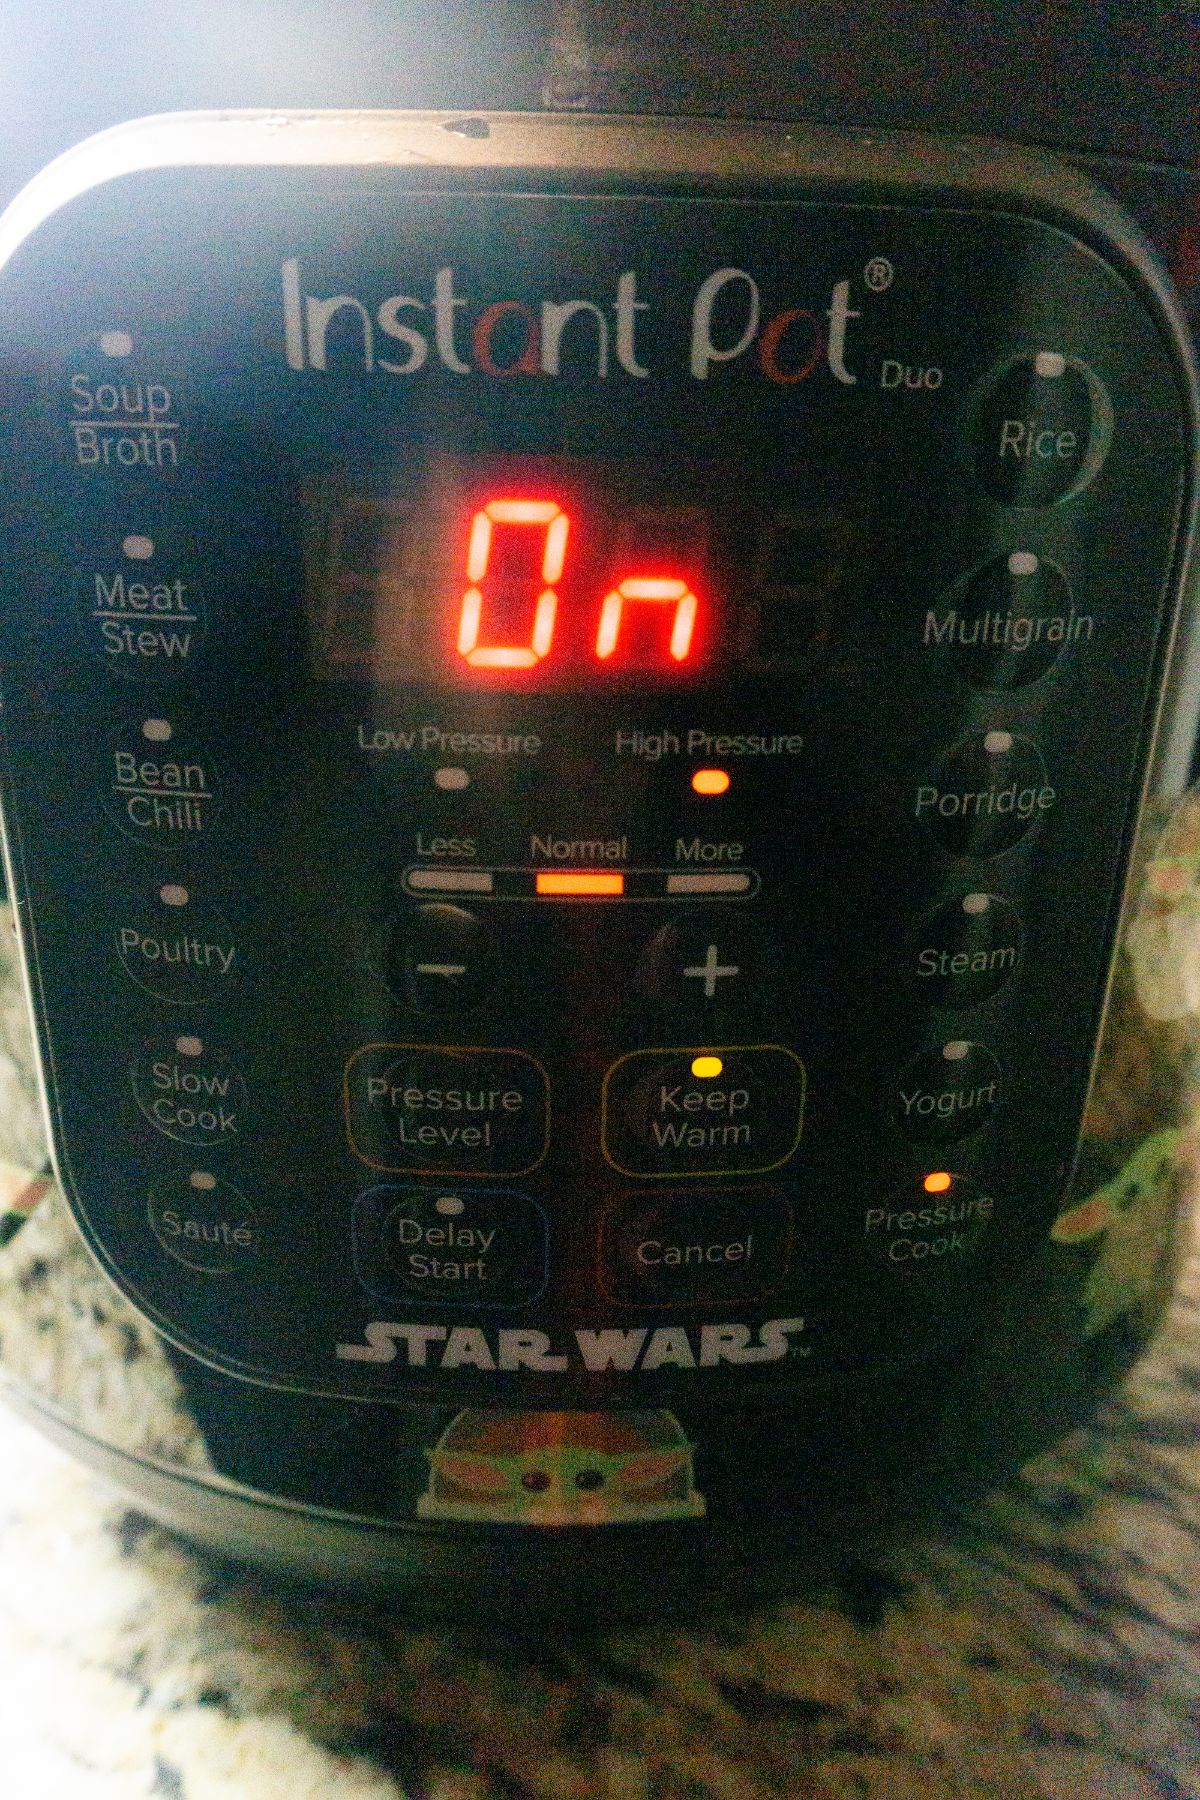 Instant pot turned to manual/normal mode.